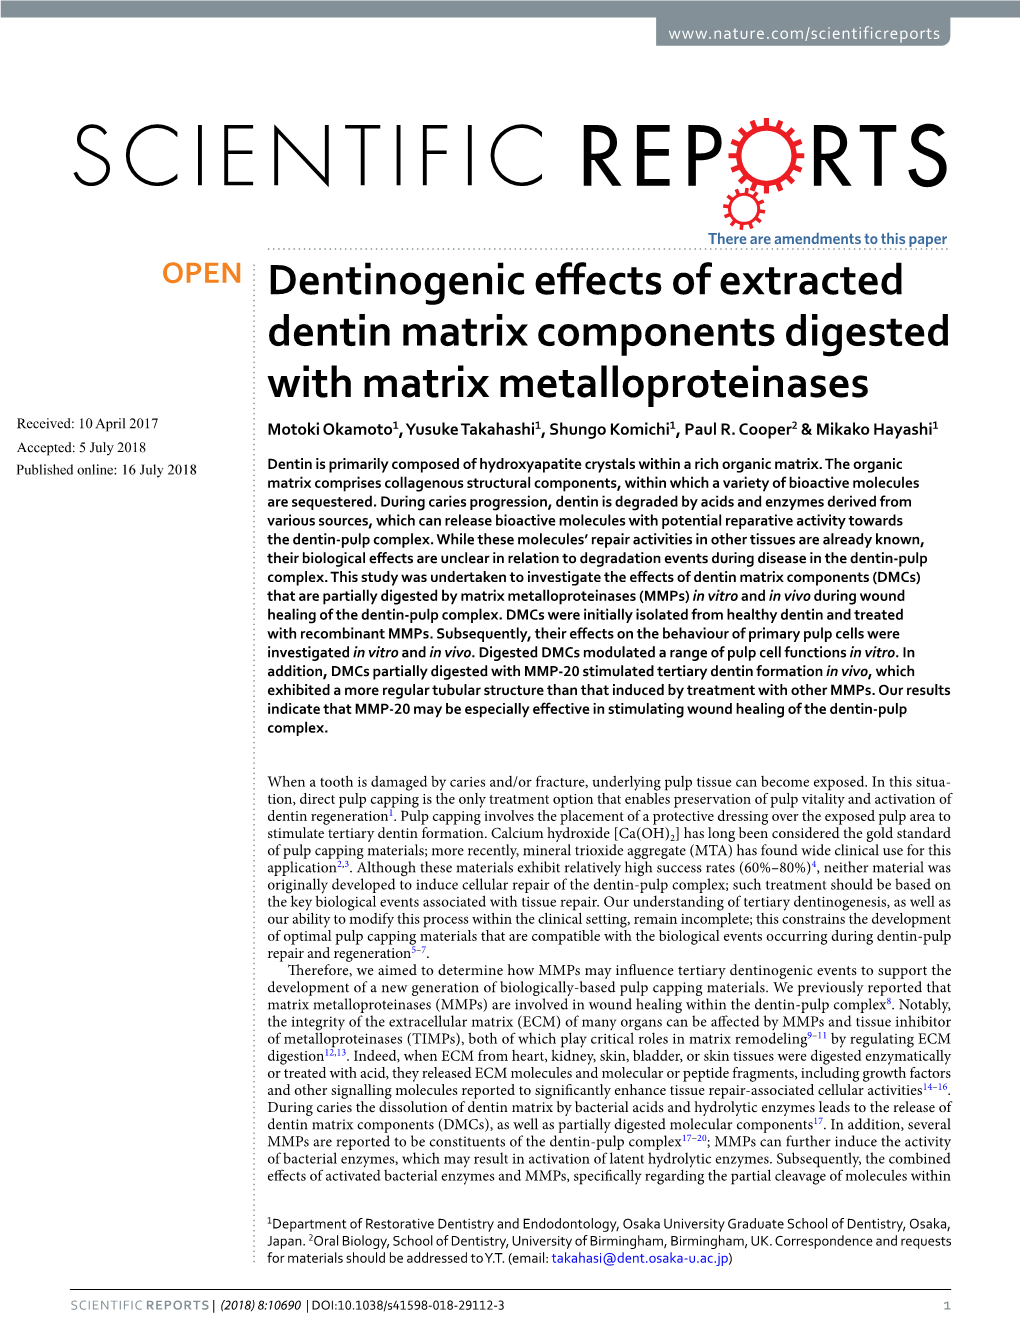 Dentinogenic Effects of Extracted Dentin Matrix Components Digested with Matrix Metalloproteinases